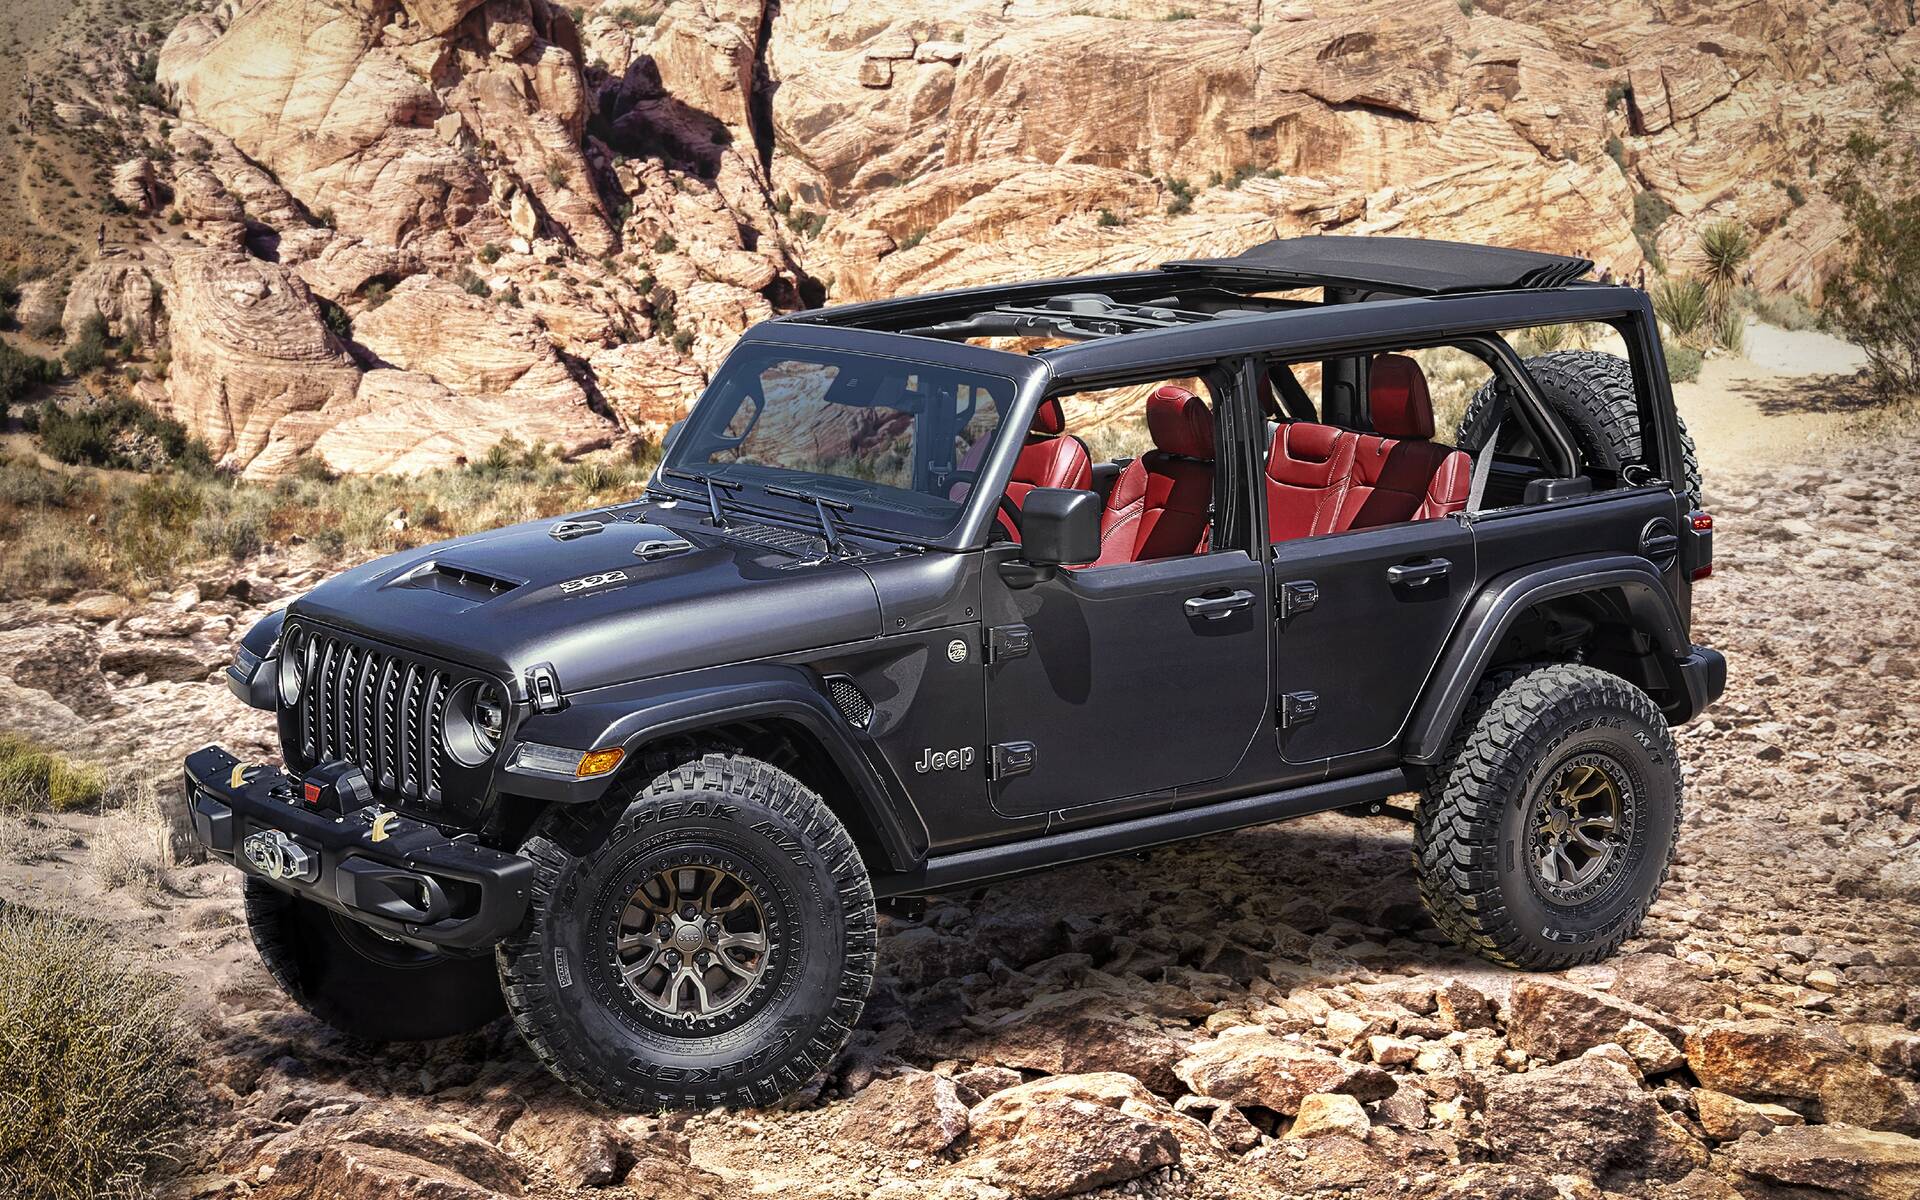 HEMI-powered Jeep Wrangler Concept Steals Bronco's Thunder - The Car Guide